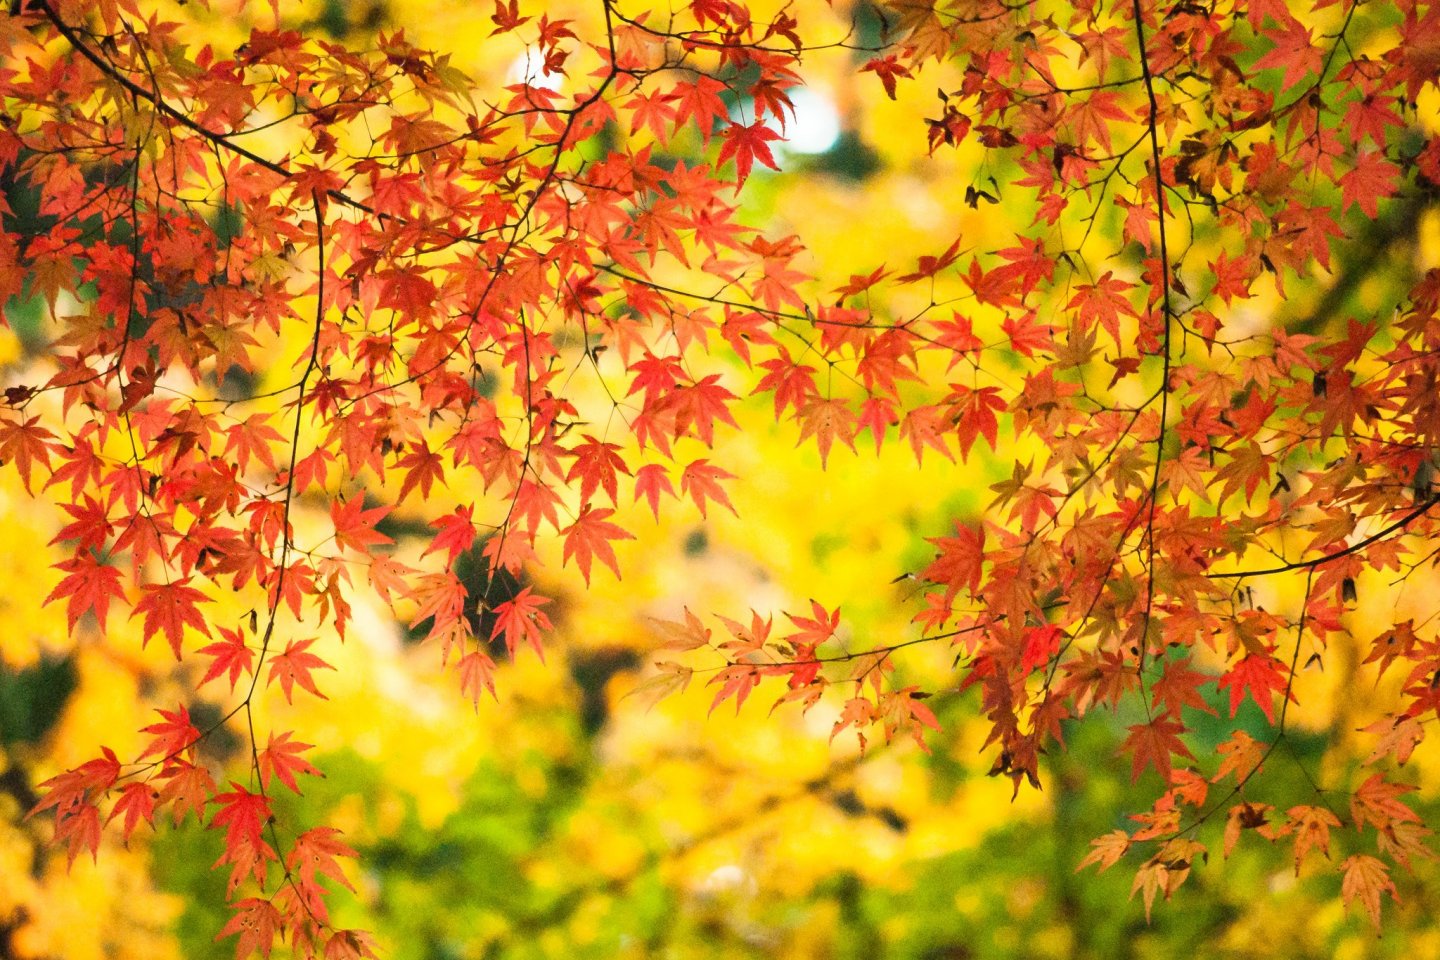 Autumn in Kyoto is a special time